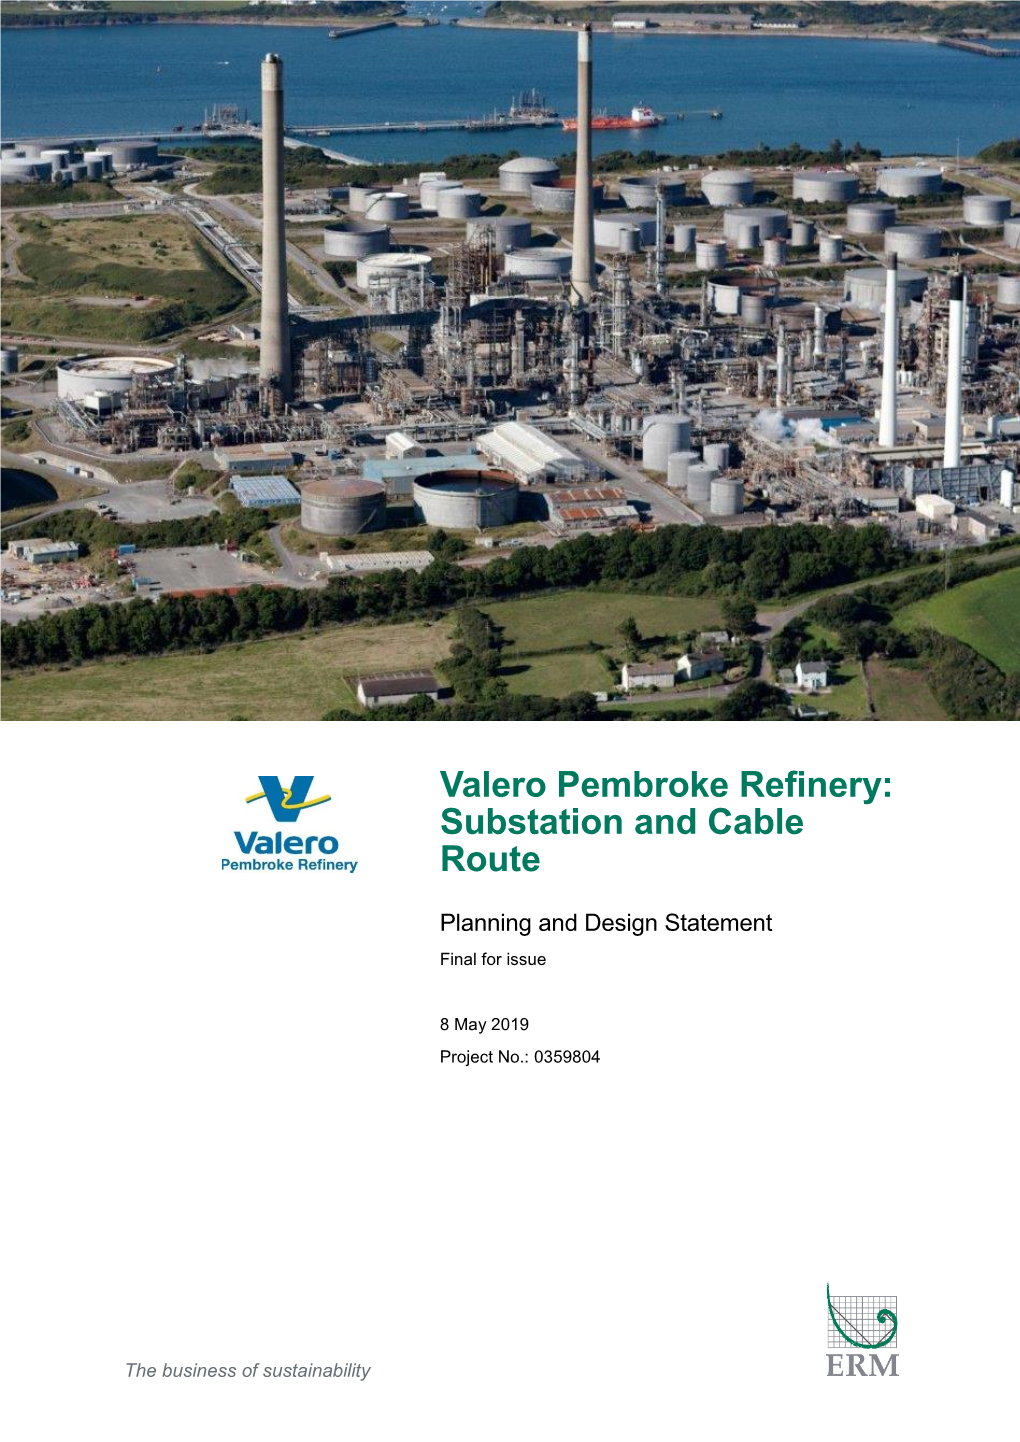 Valero Pembroke Refinery: Substation and Cable Route